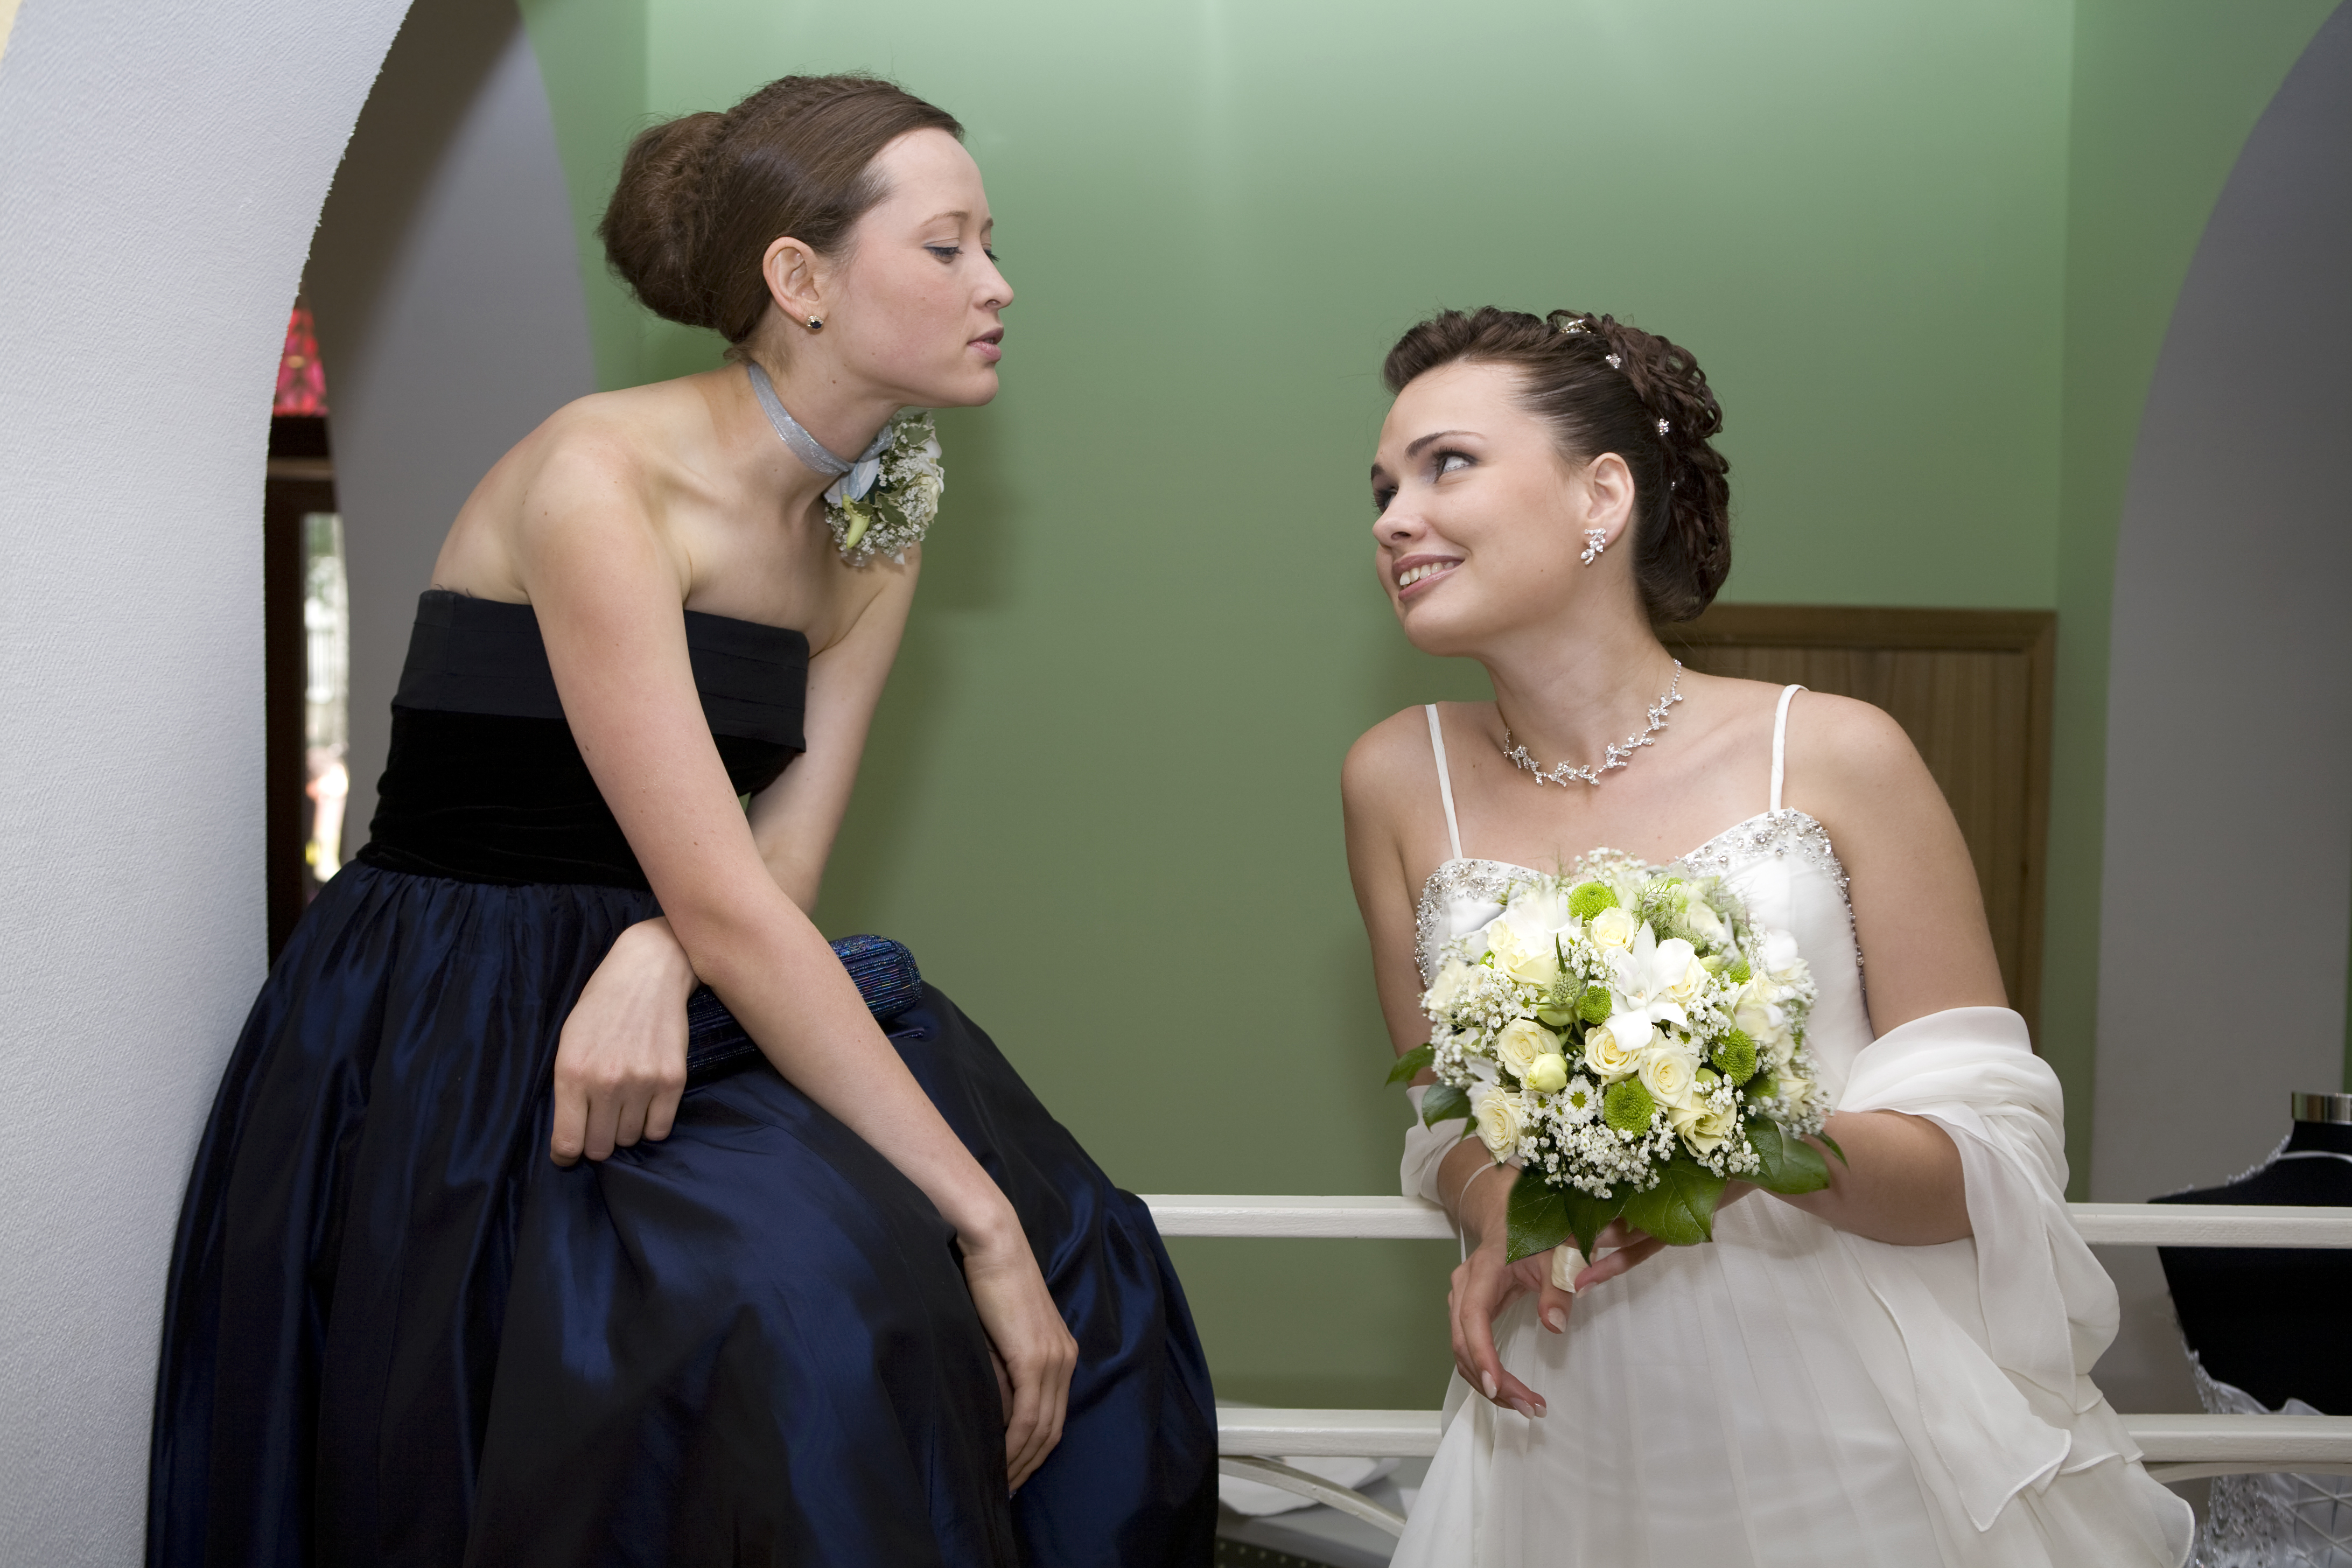 A bride and maid of honor | Source: Shutterstock